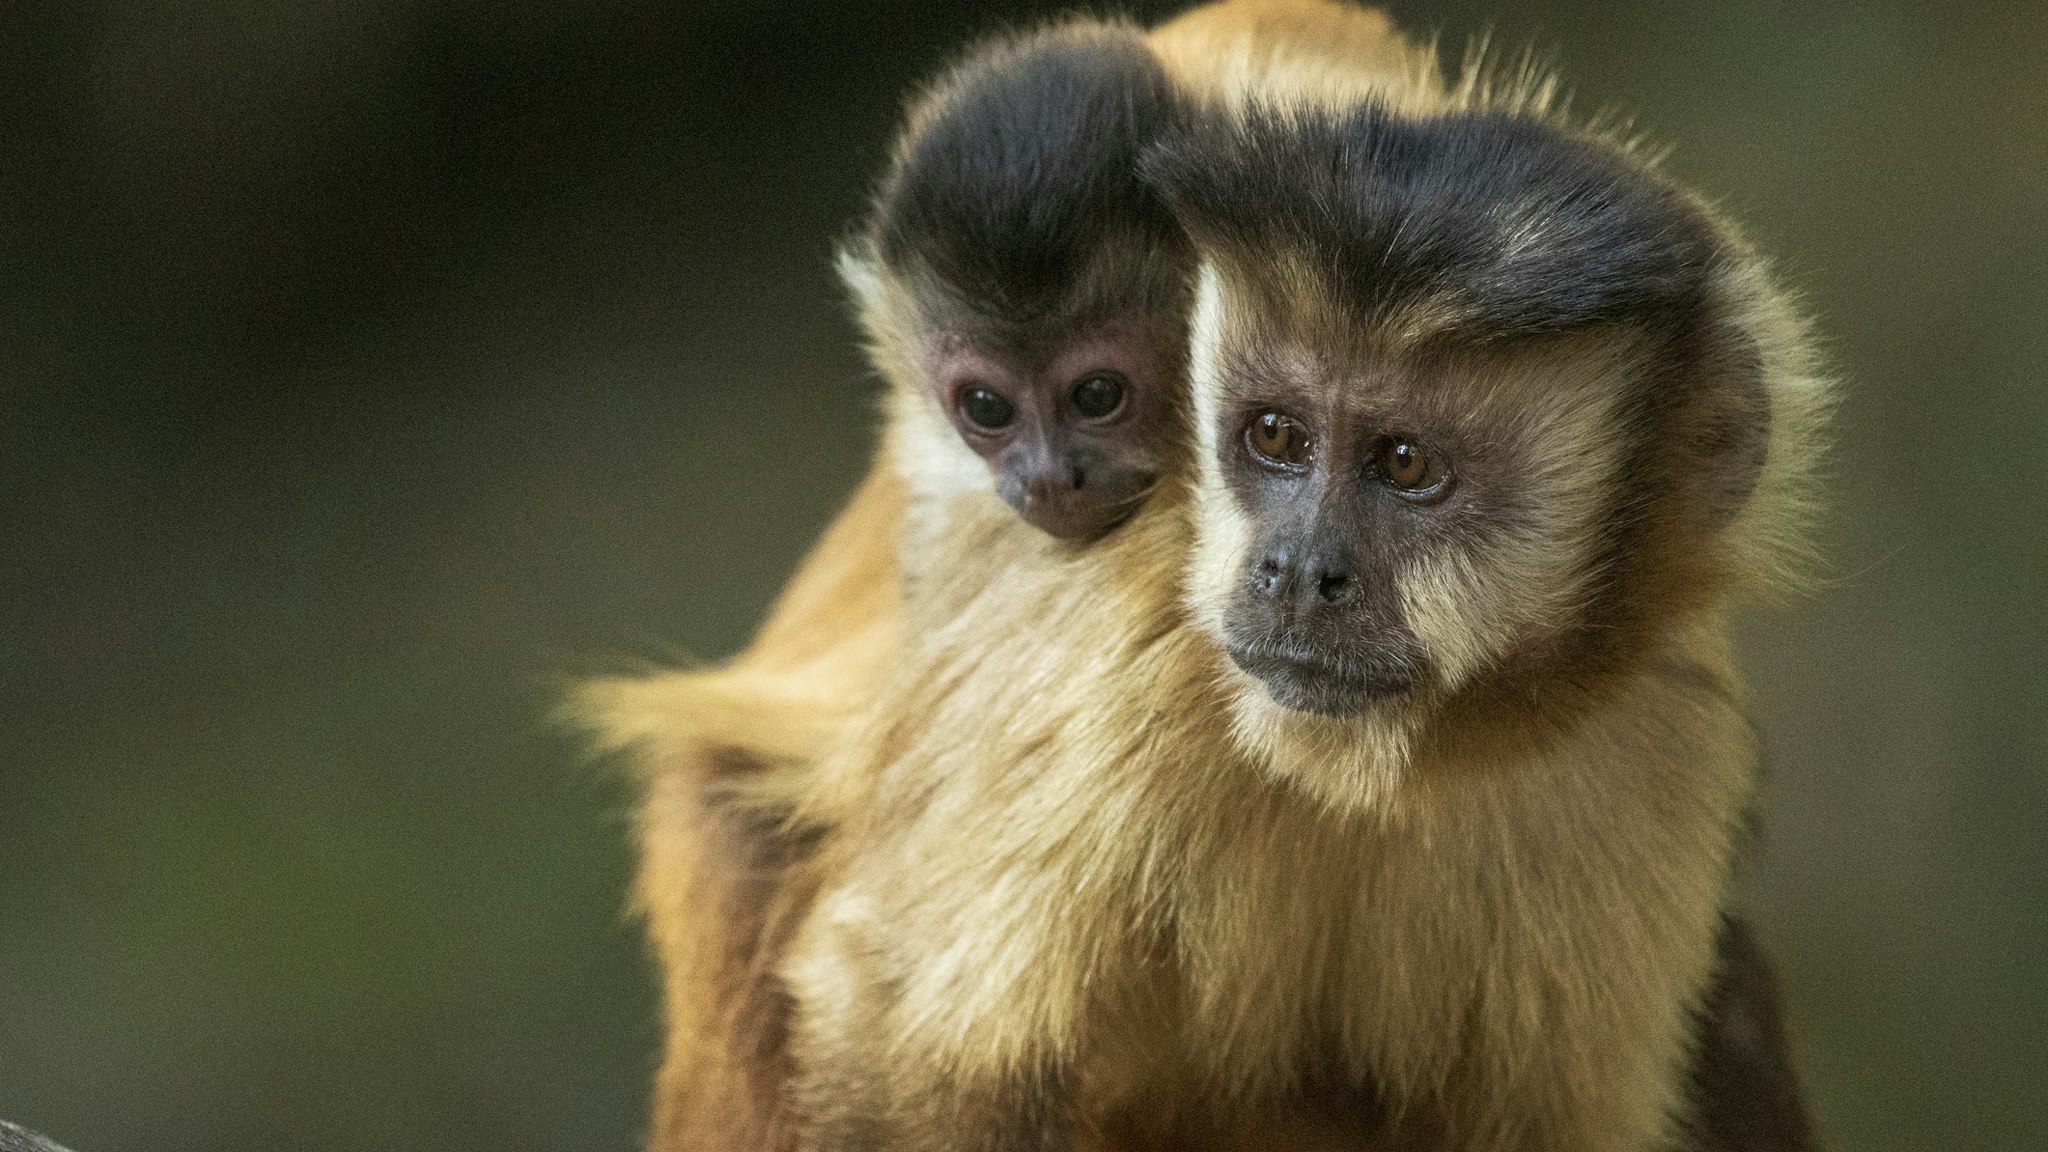 A mother Hooded Capuchin Monkey carries her baby on her back along the banks of the Rio Formoso, in Mato Grosso do Sul, Brazil.